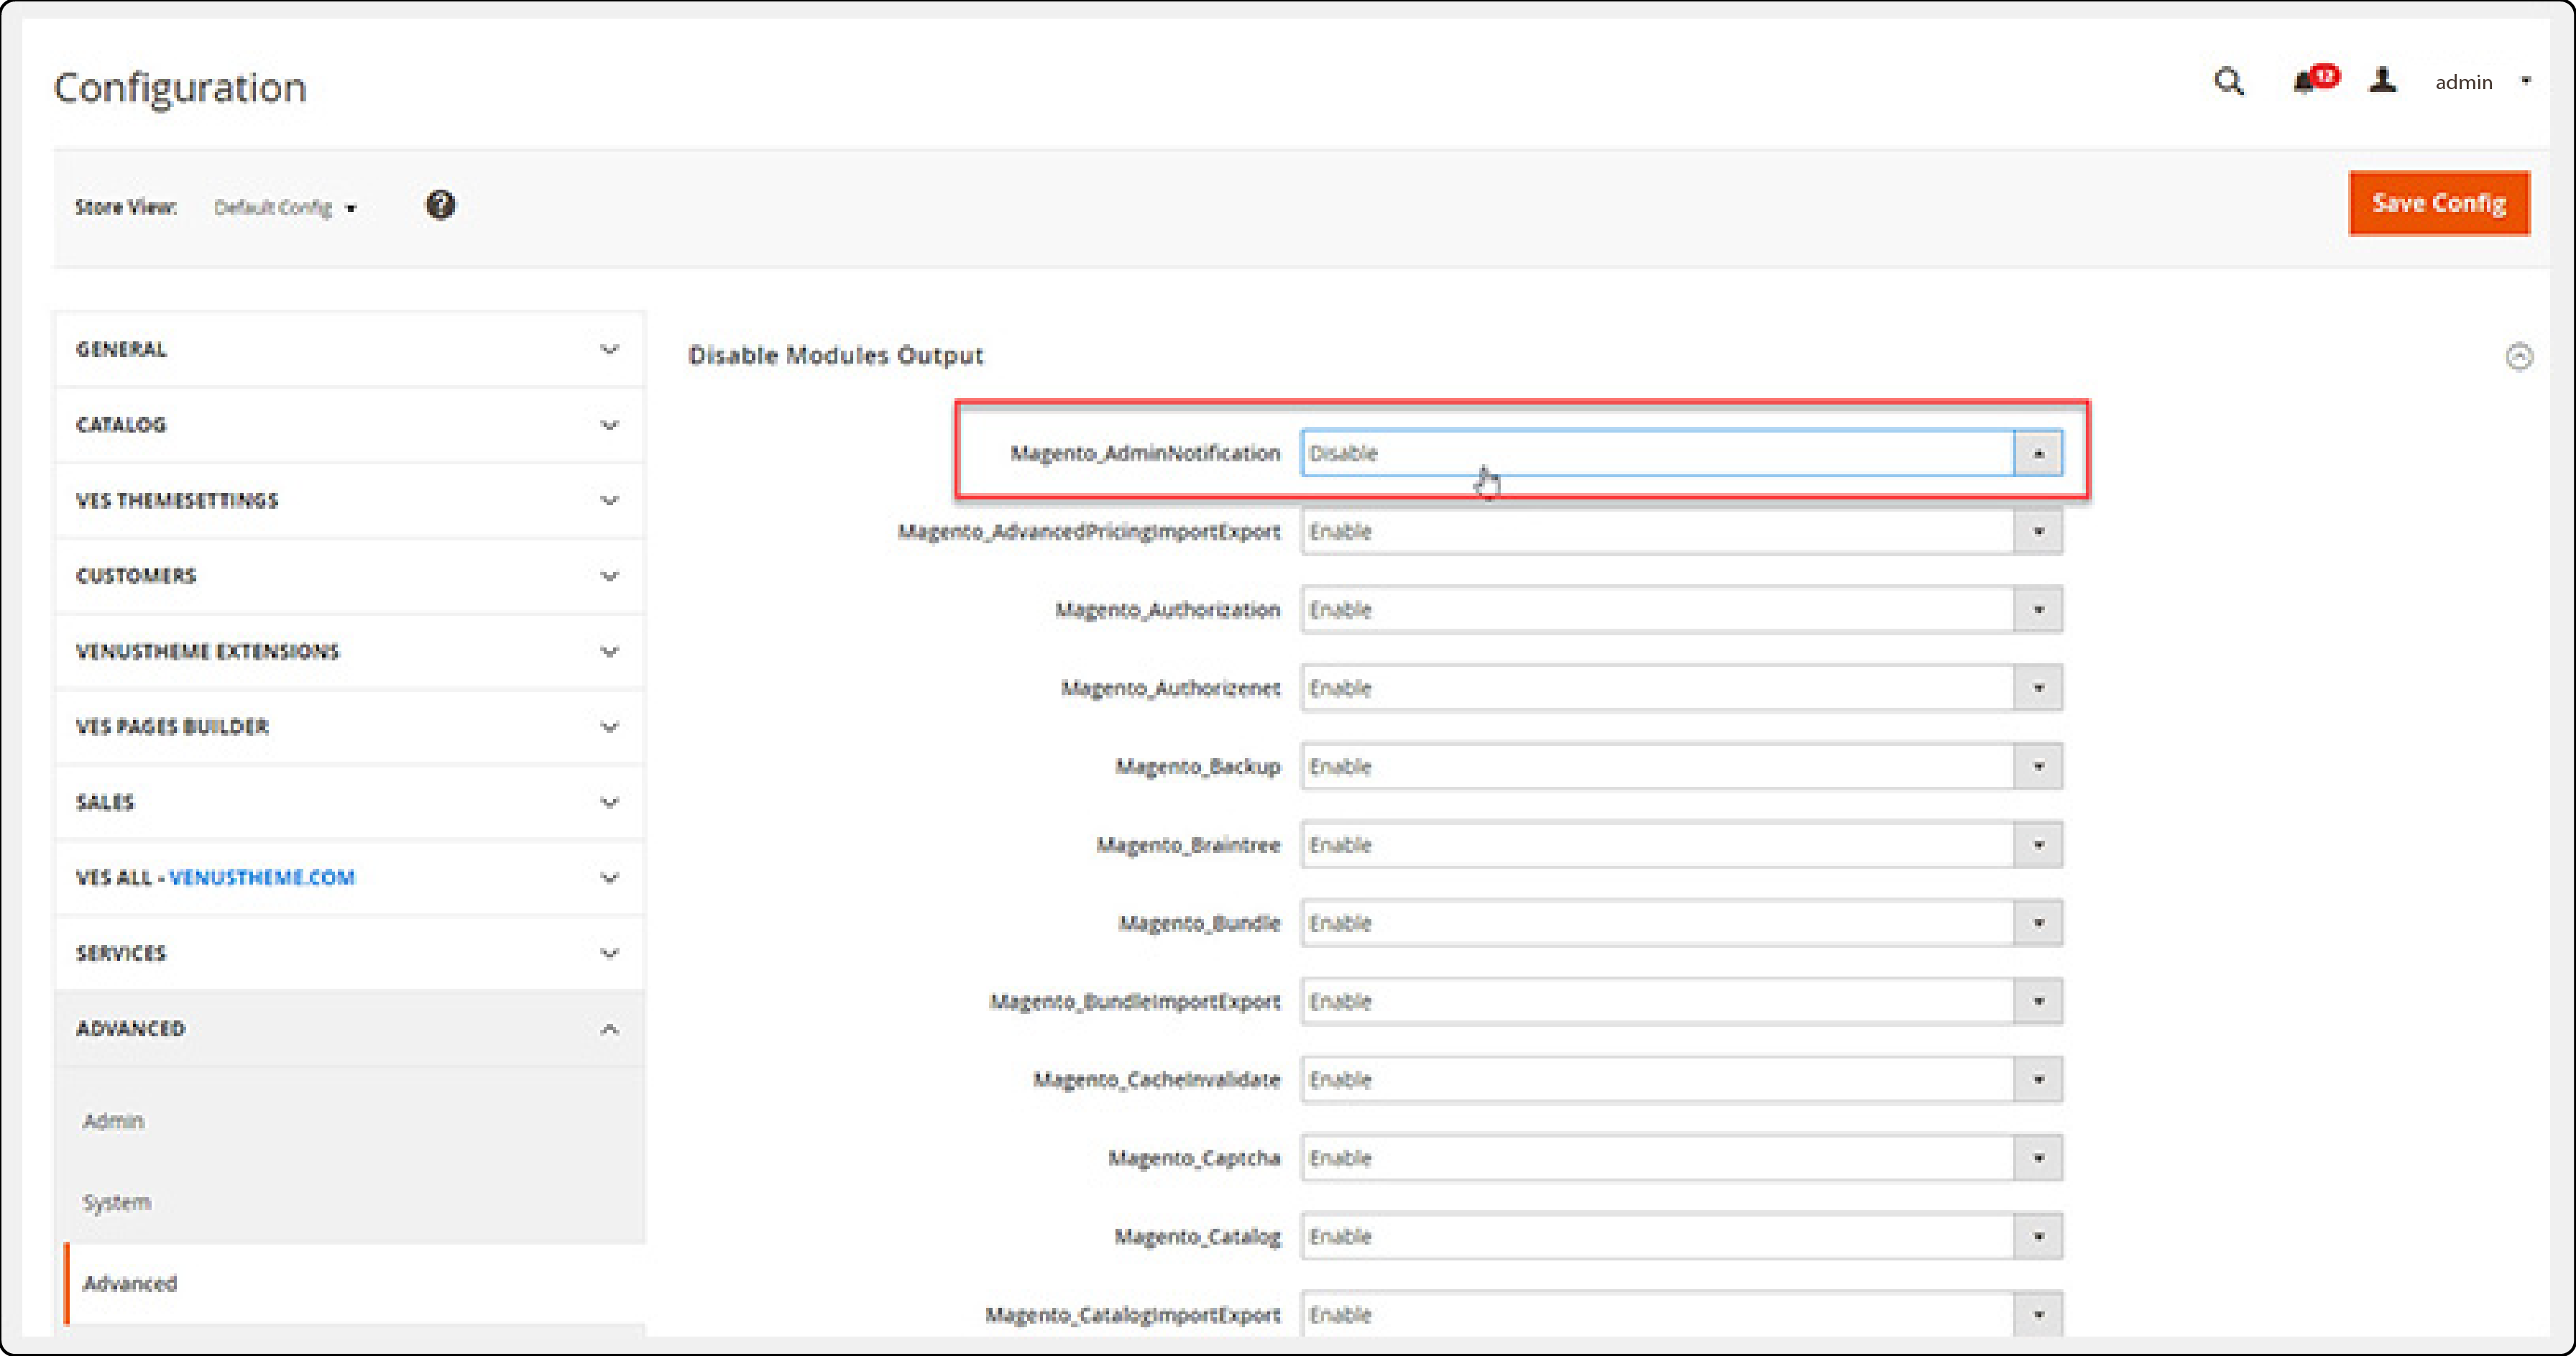 Disable Modules Output in Magento Admin Notification